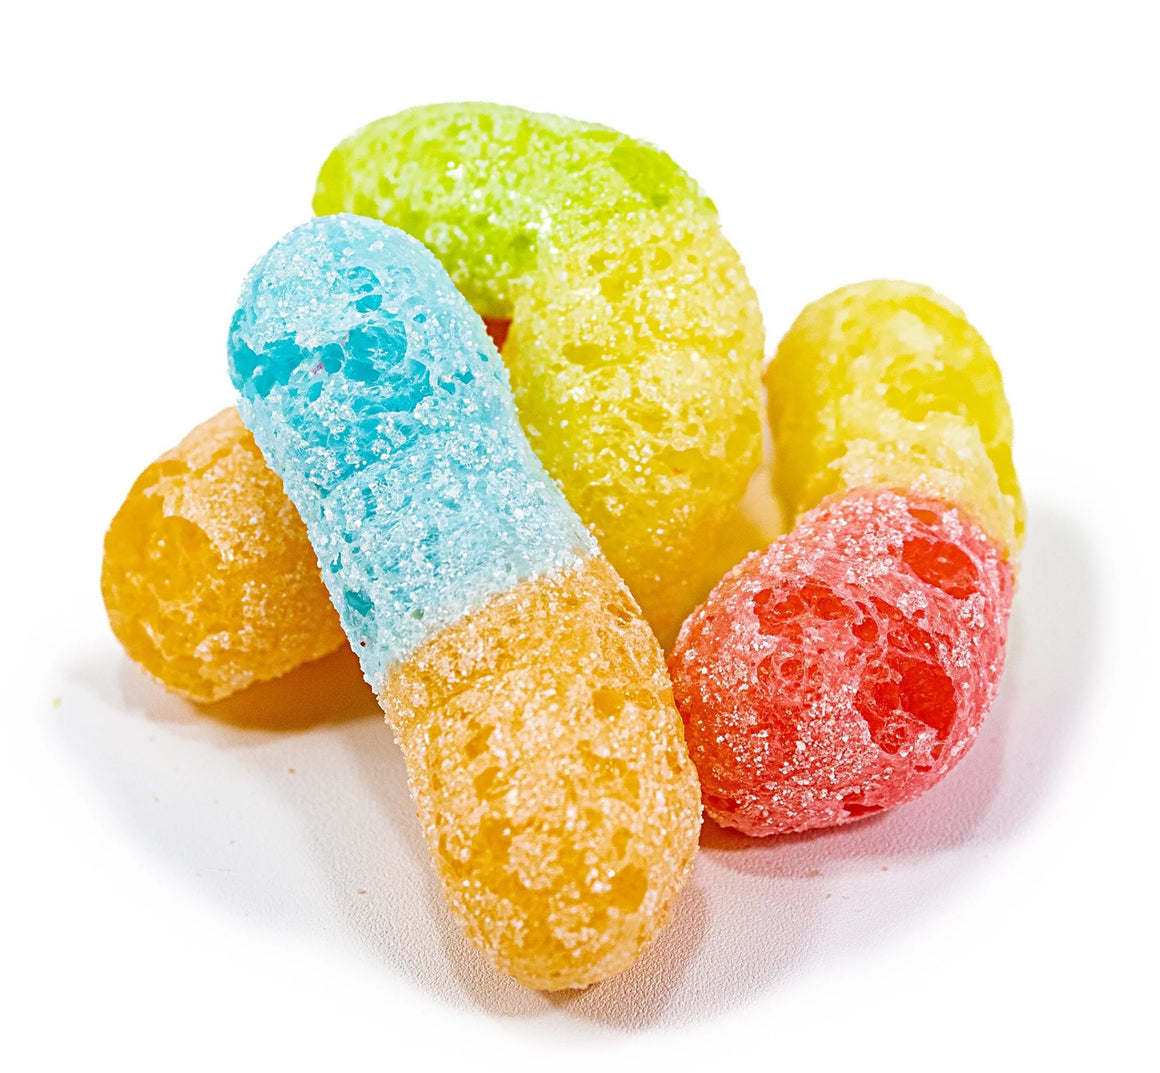 Frigglers Freeze-Dried Sour Mini Assorted Gummi Worms 1.8 oz - For fresh candy and great service, visit www.allcitycandy.com